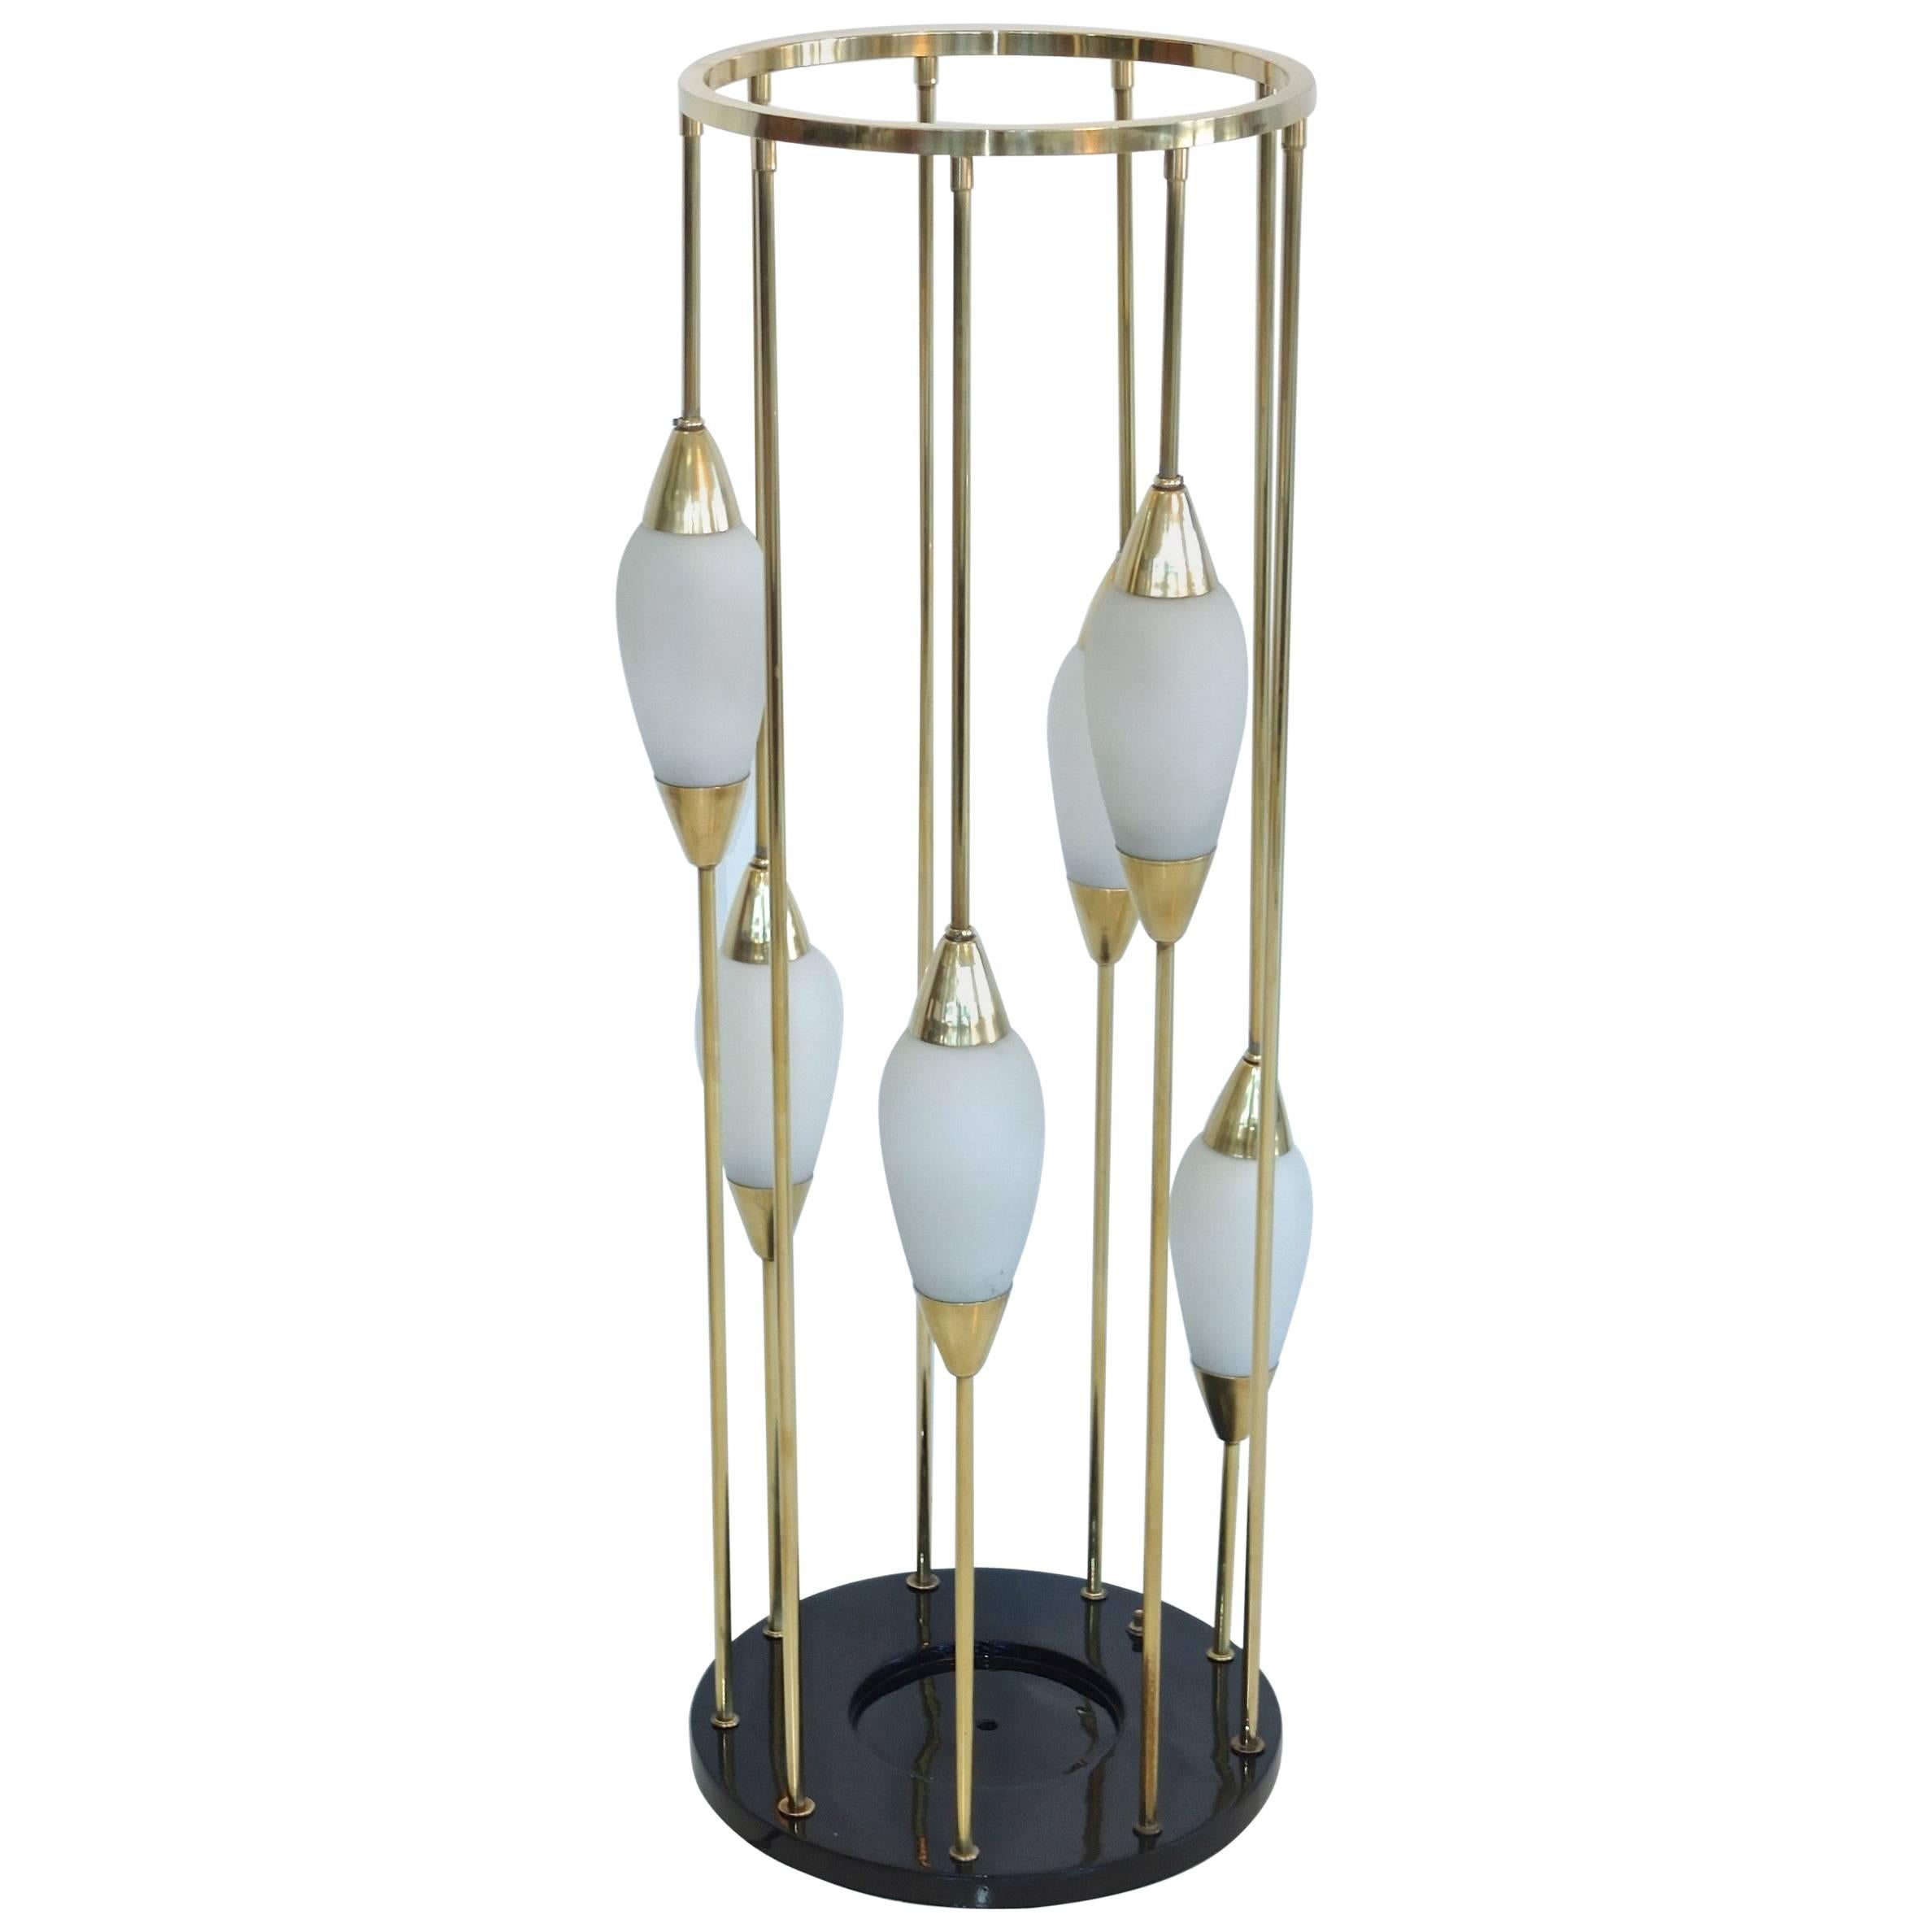 1950s Italian Brass Cage Lamp Pedestal Stand For Sale